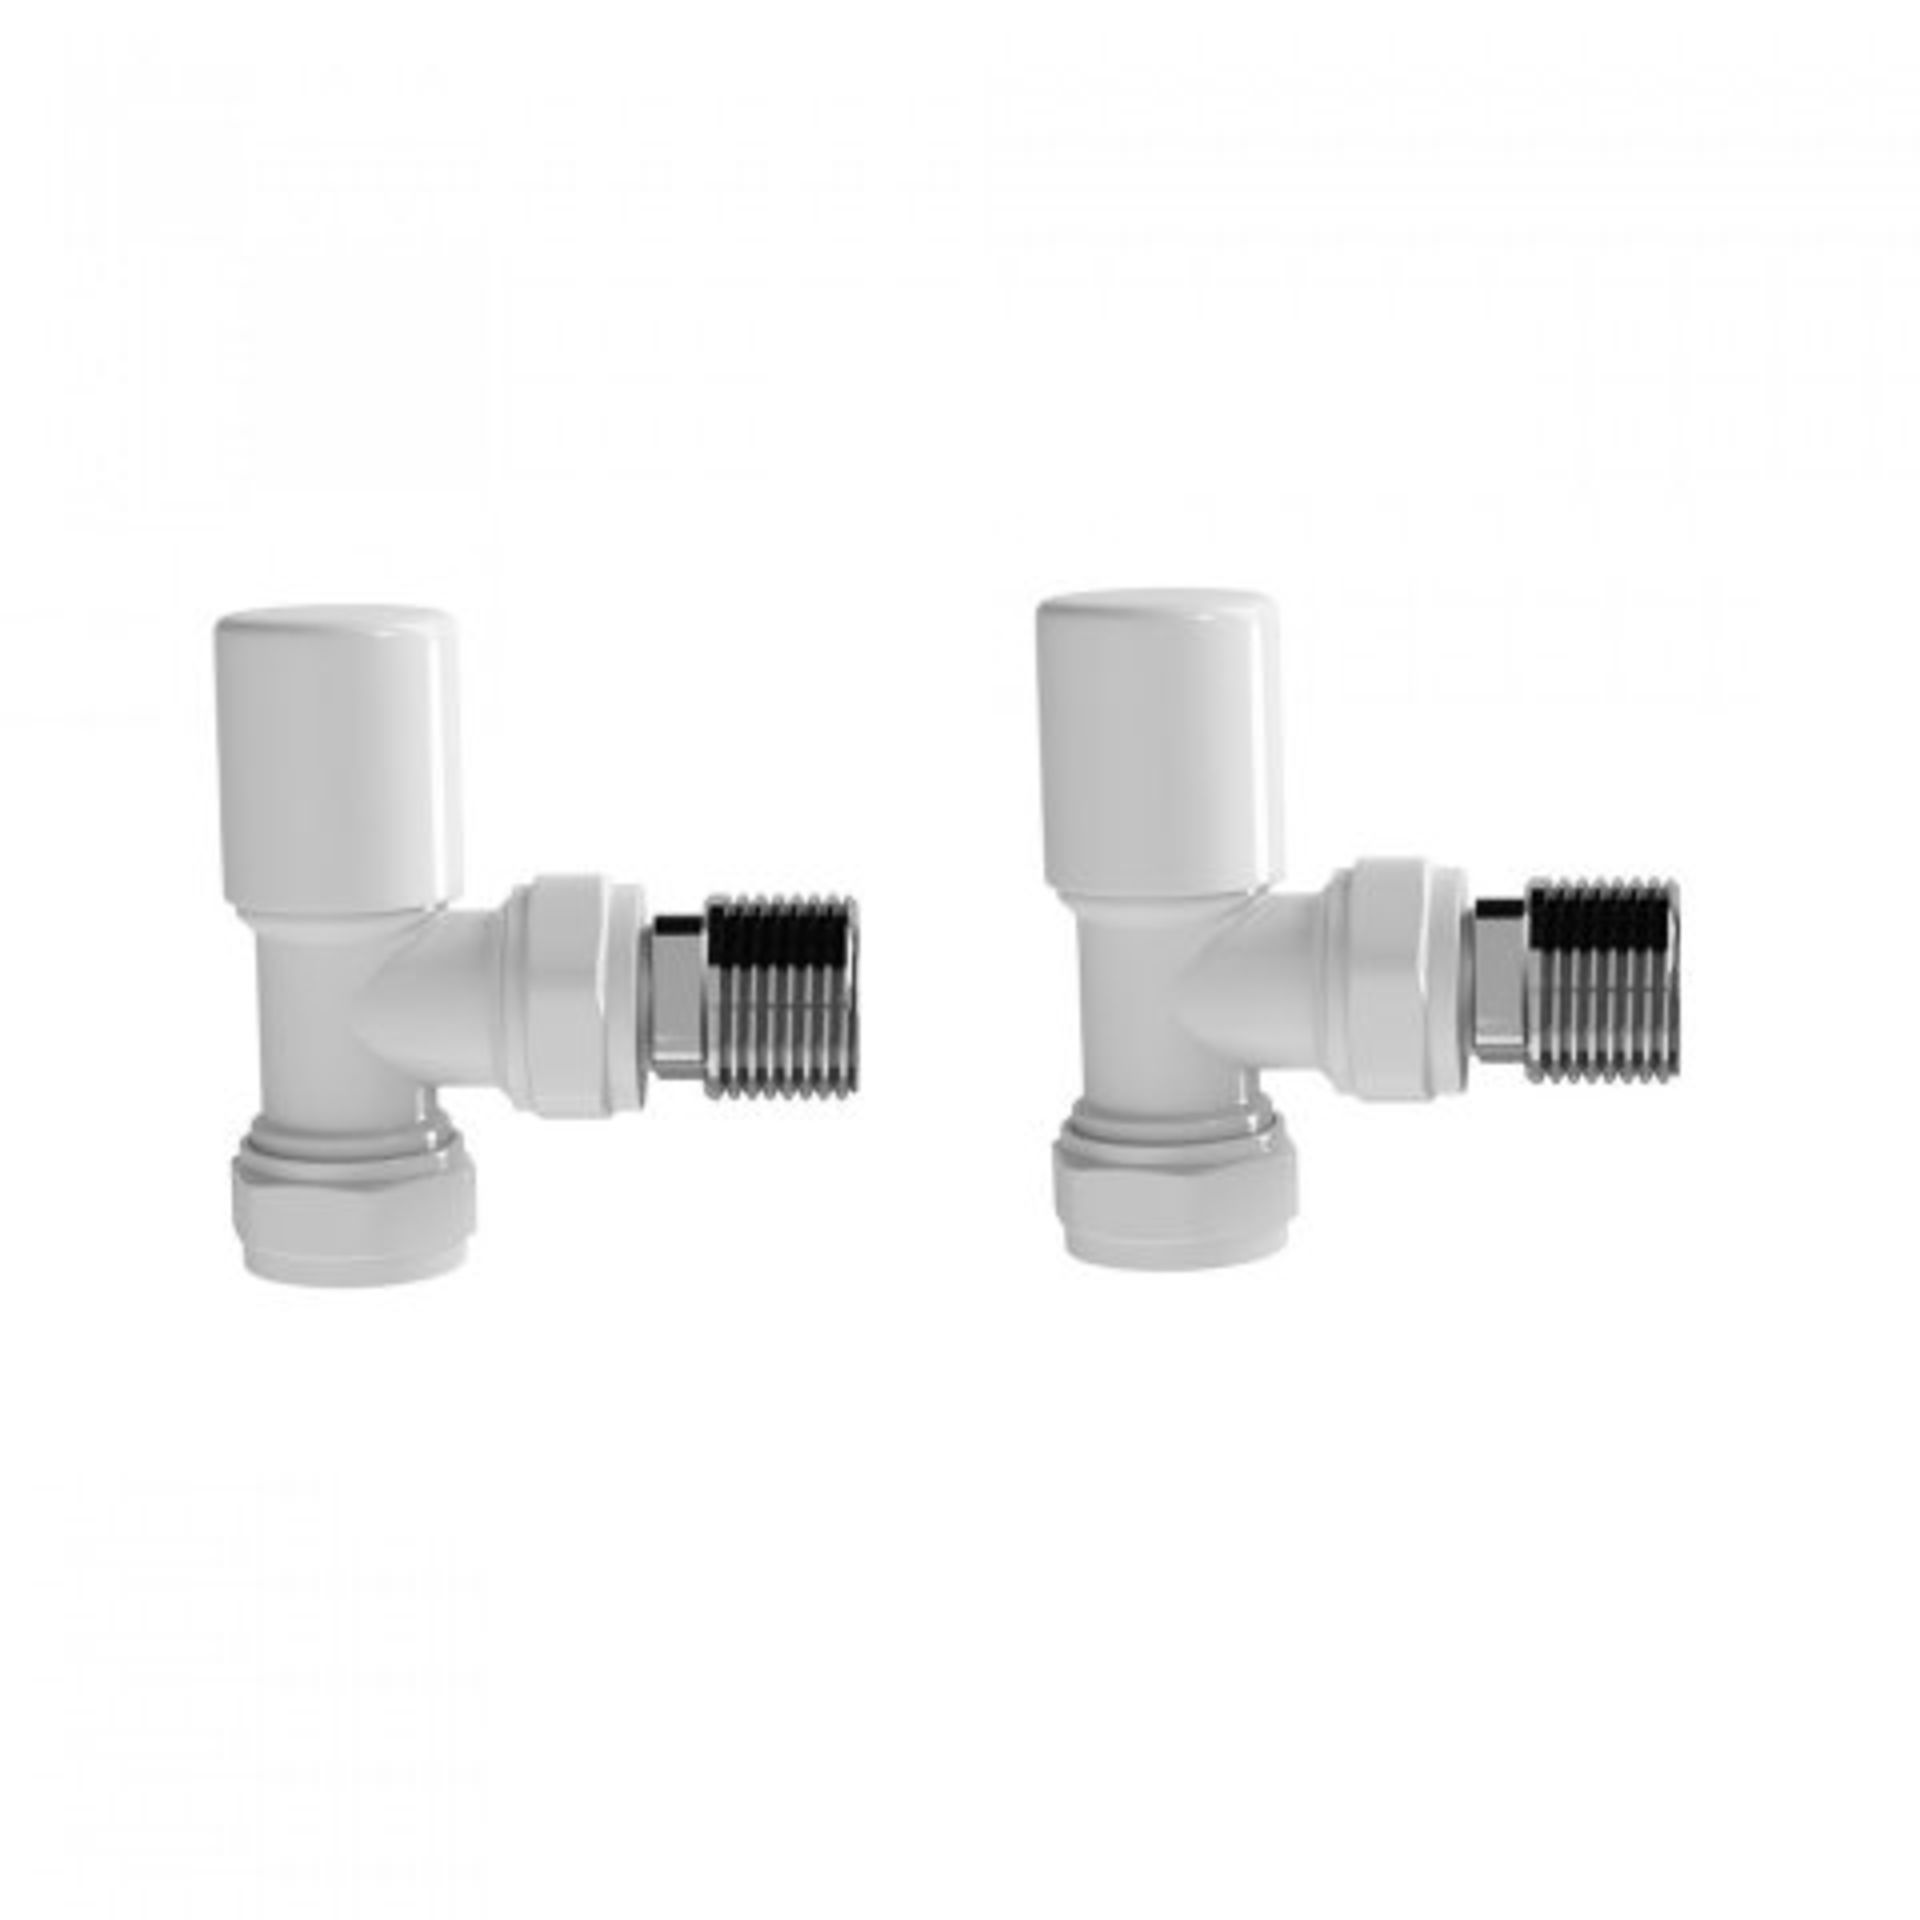 (AA43) 15mm Standard Connection Angled Gloss White Radiator Valves Made of solid brass, our Angled